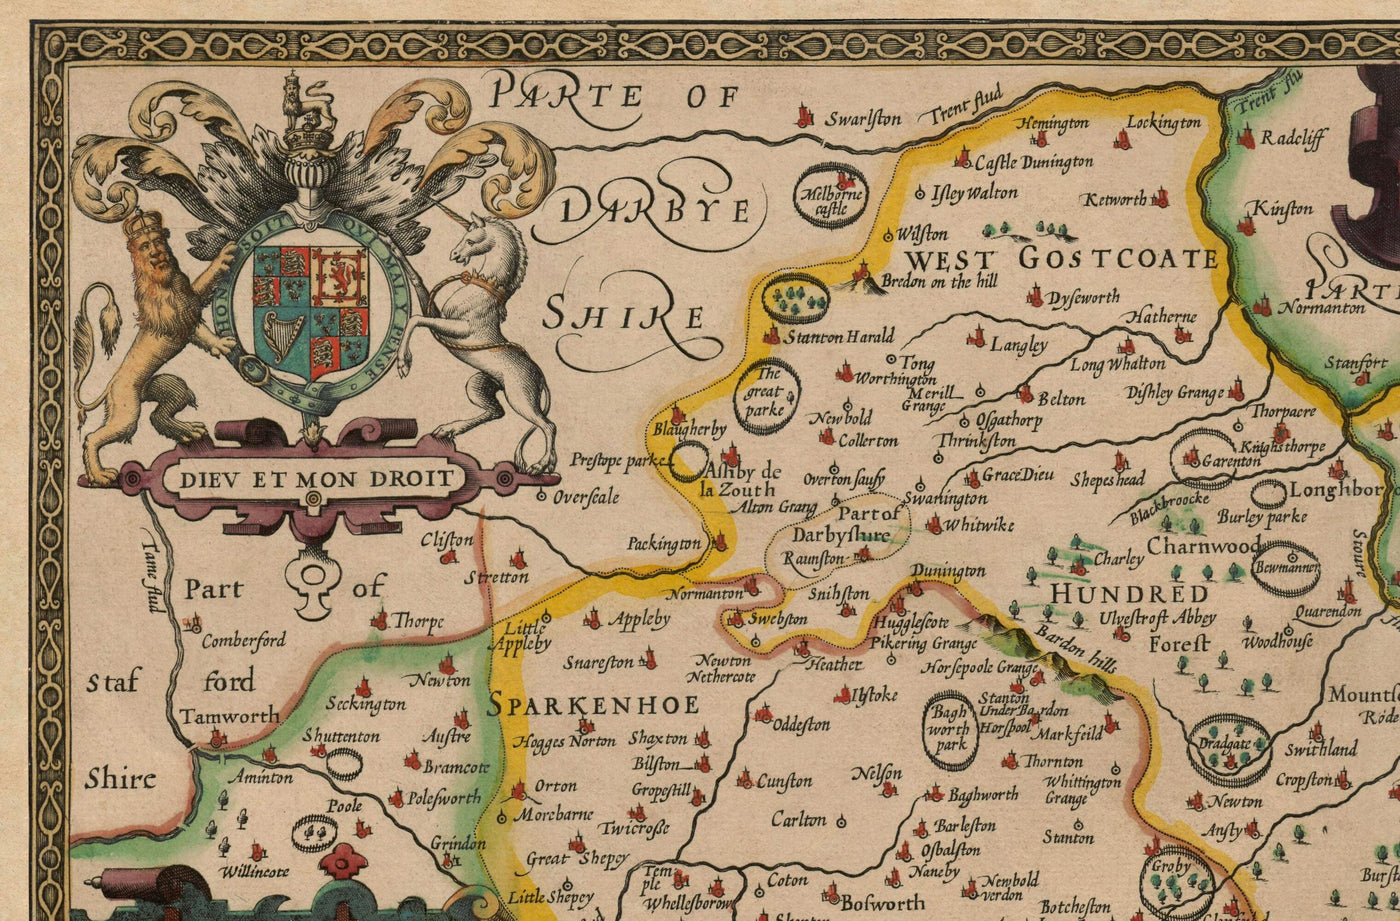 Old Map of Leicestershire in 1611 by John Speed - Leicester, Loughborough, Hinckley, Wigston